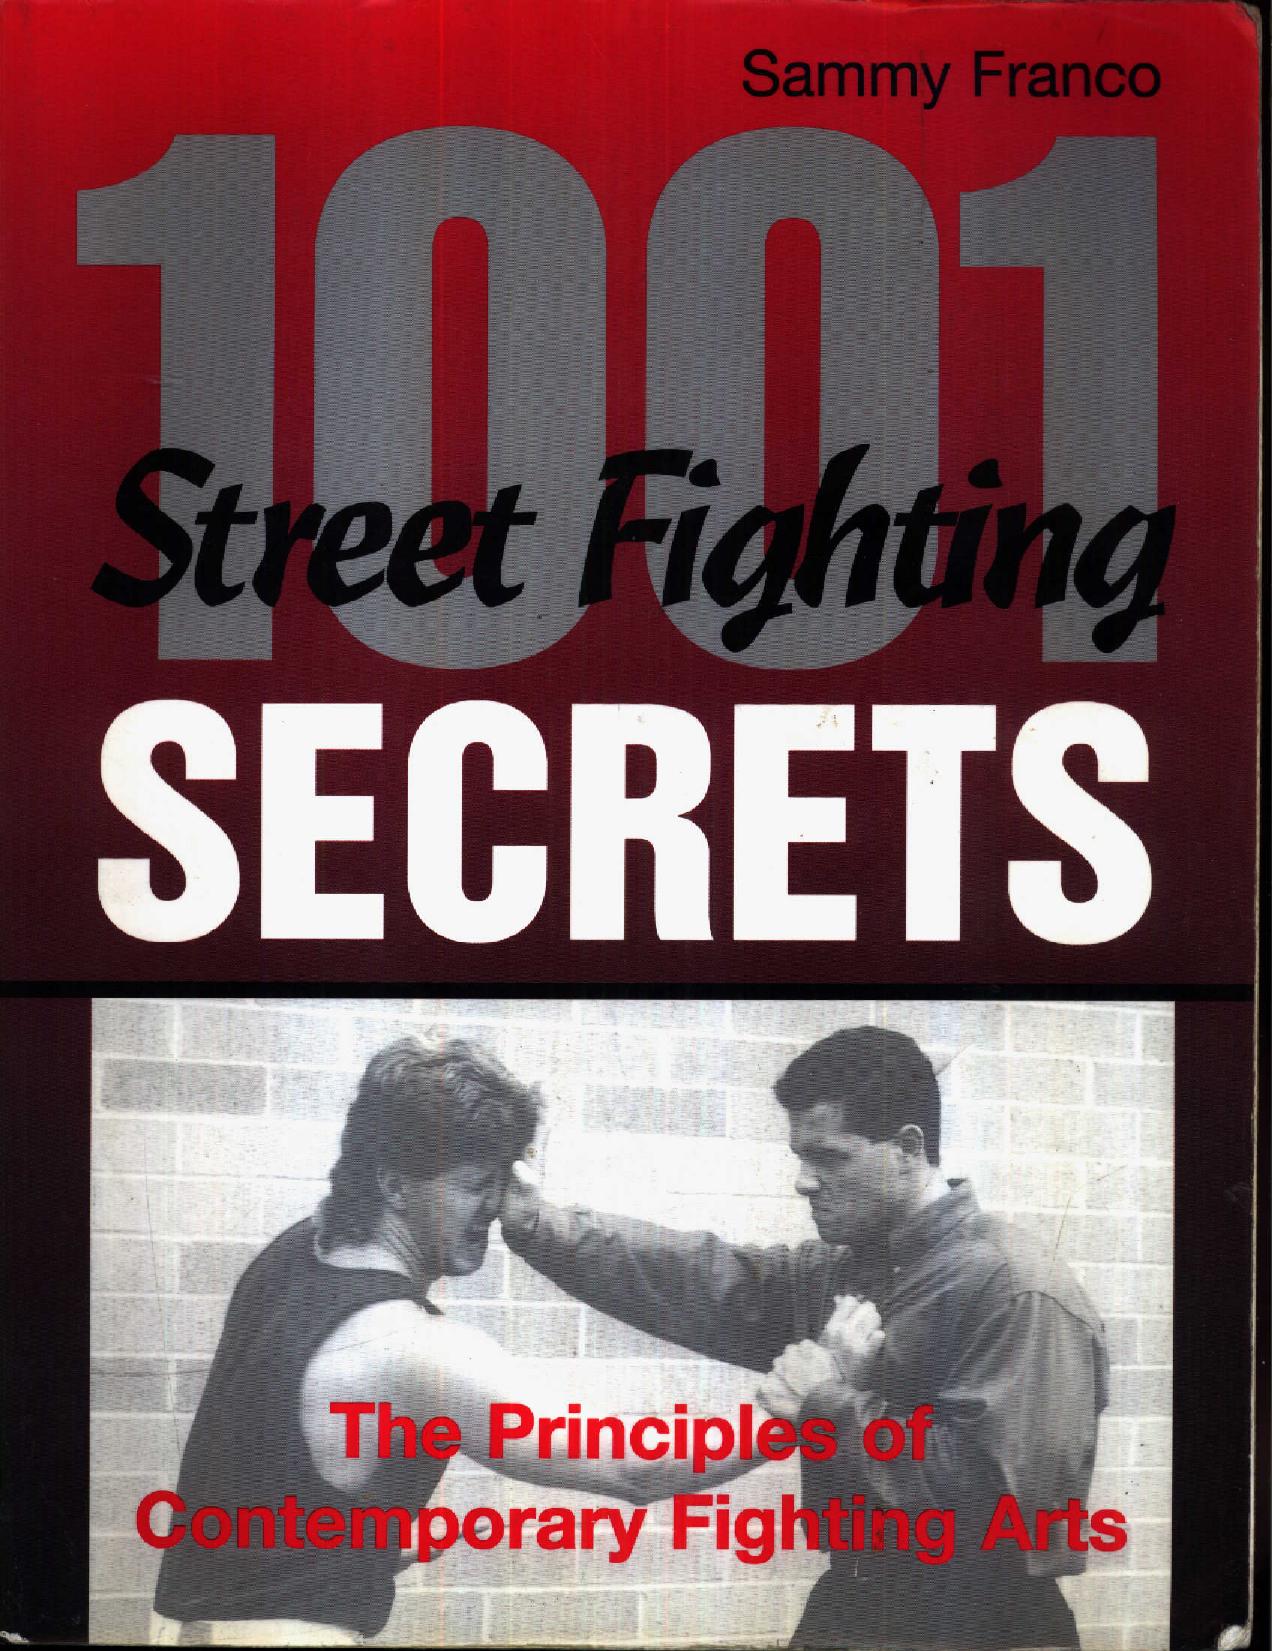 1,001 Street Fighting Secrets: The Principles of Contemporary Fighting Arts